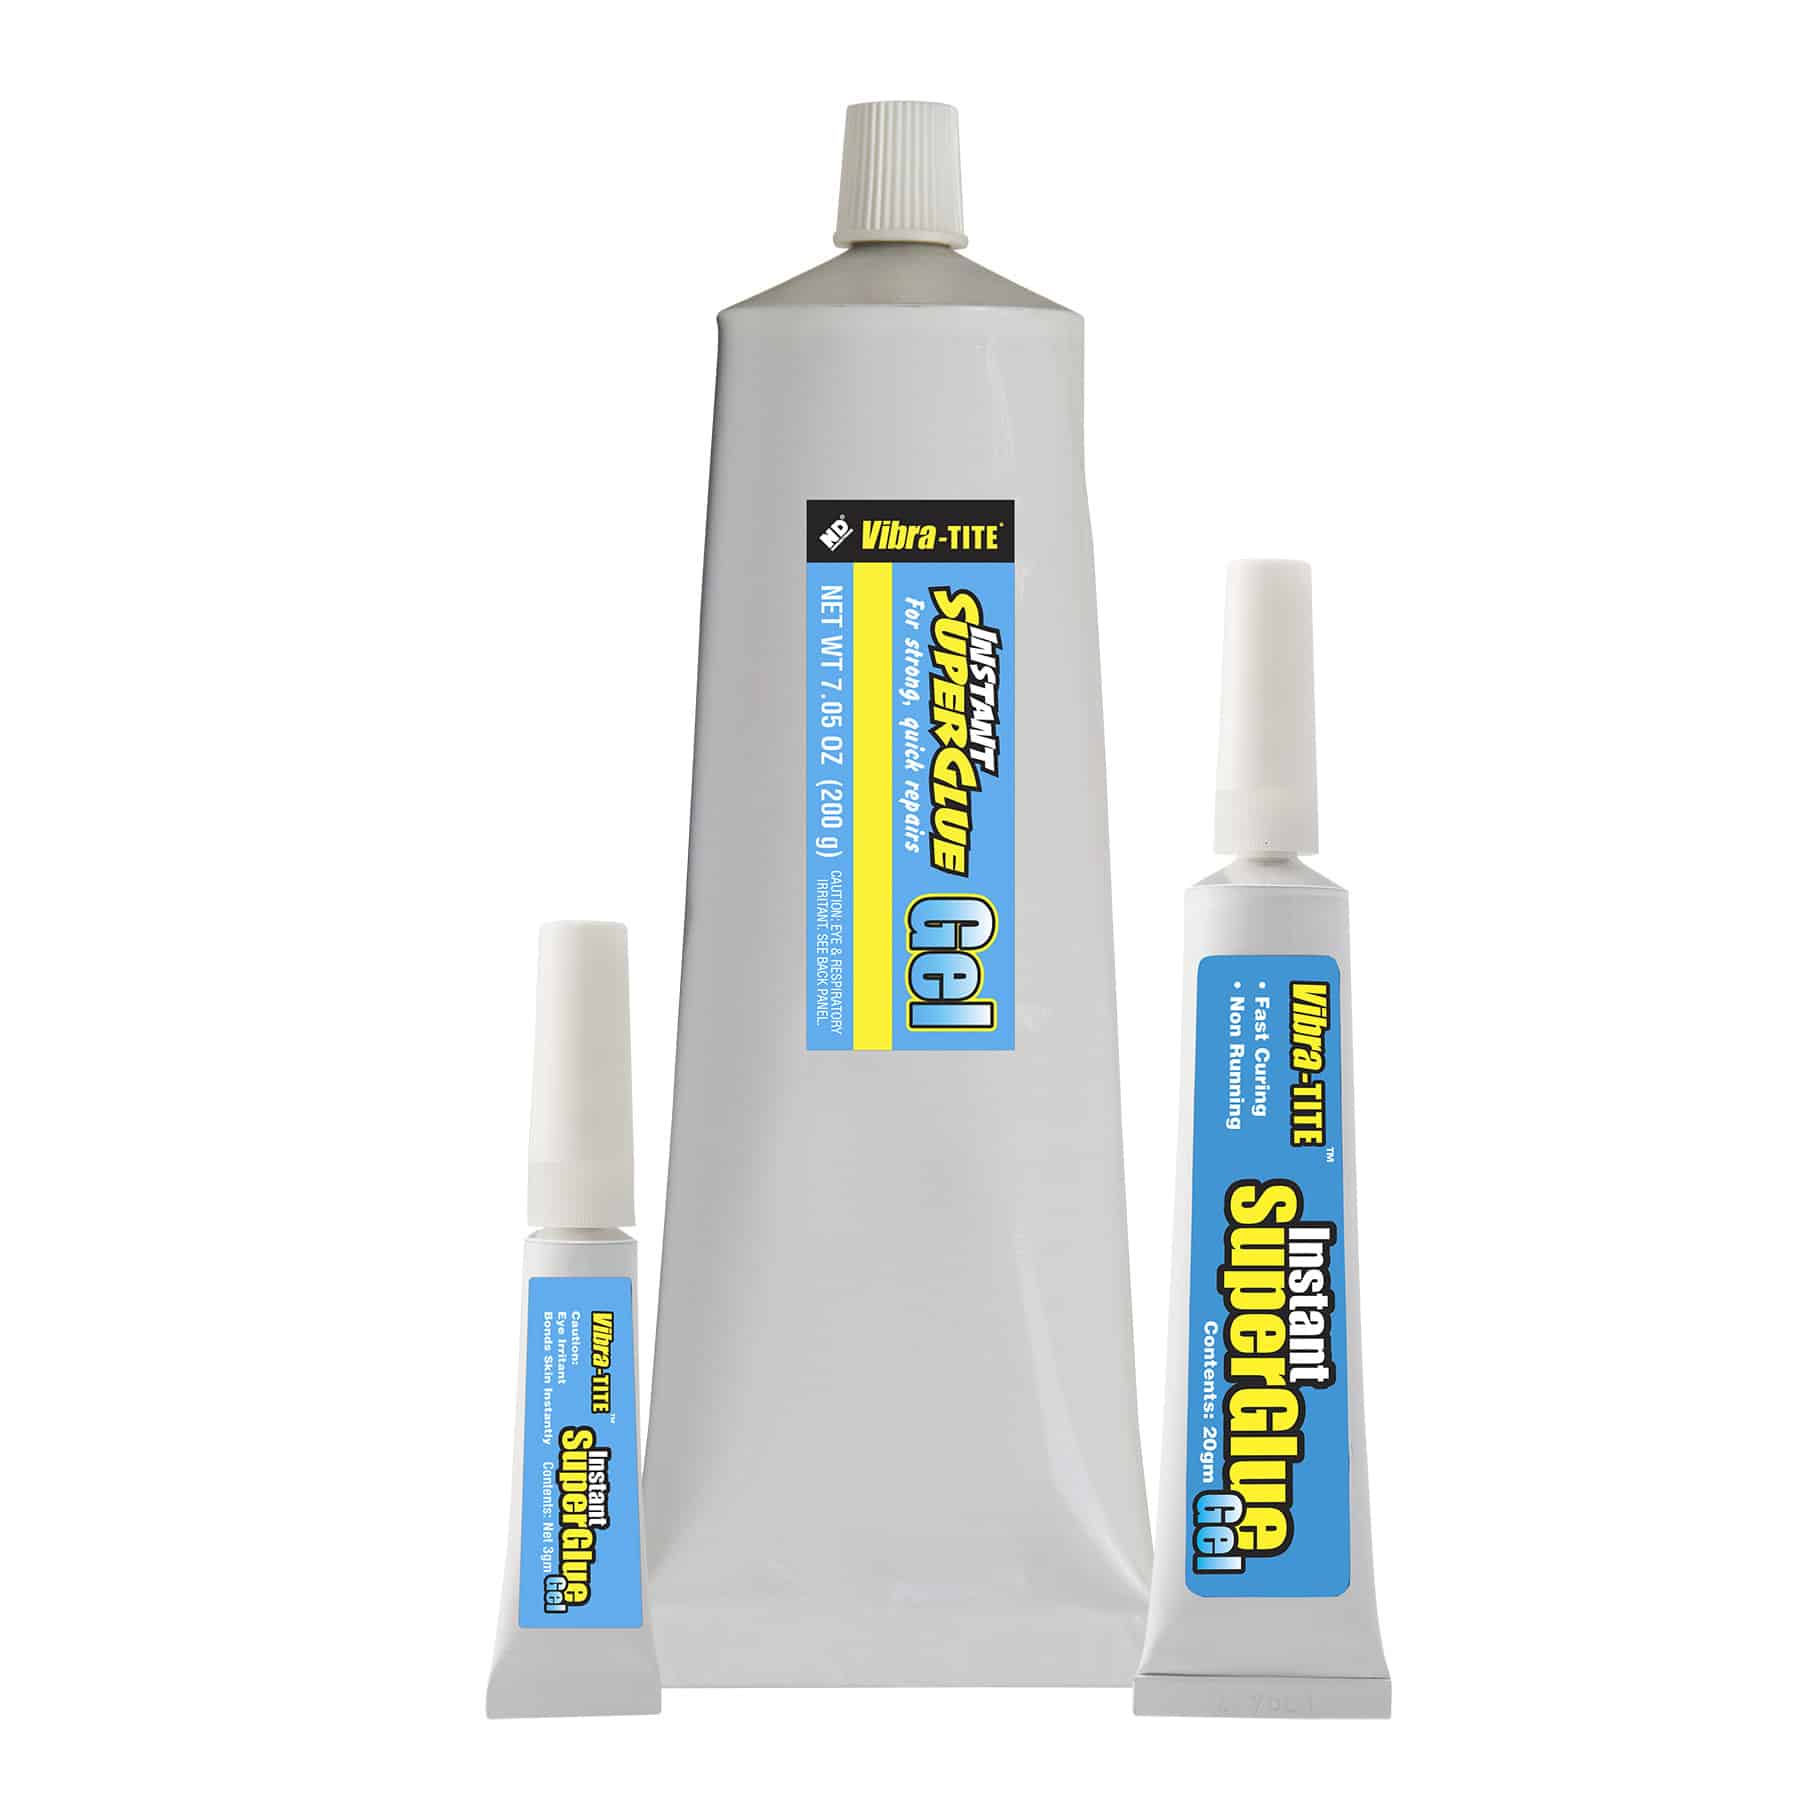 BRAND NEW INSTANT KRAZY GLUE GEL ALL PURPOSE ADHESIVE ADHESION